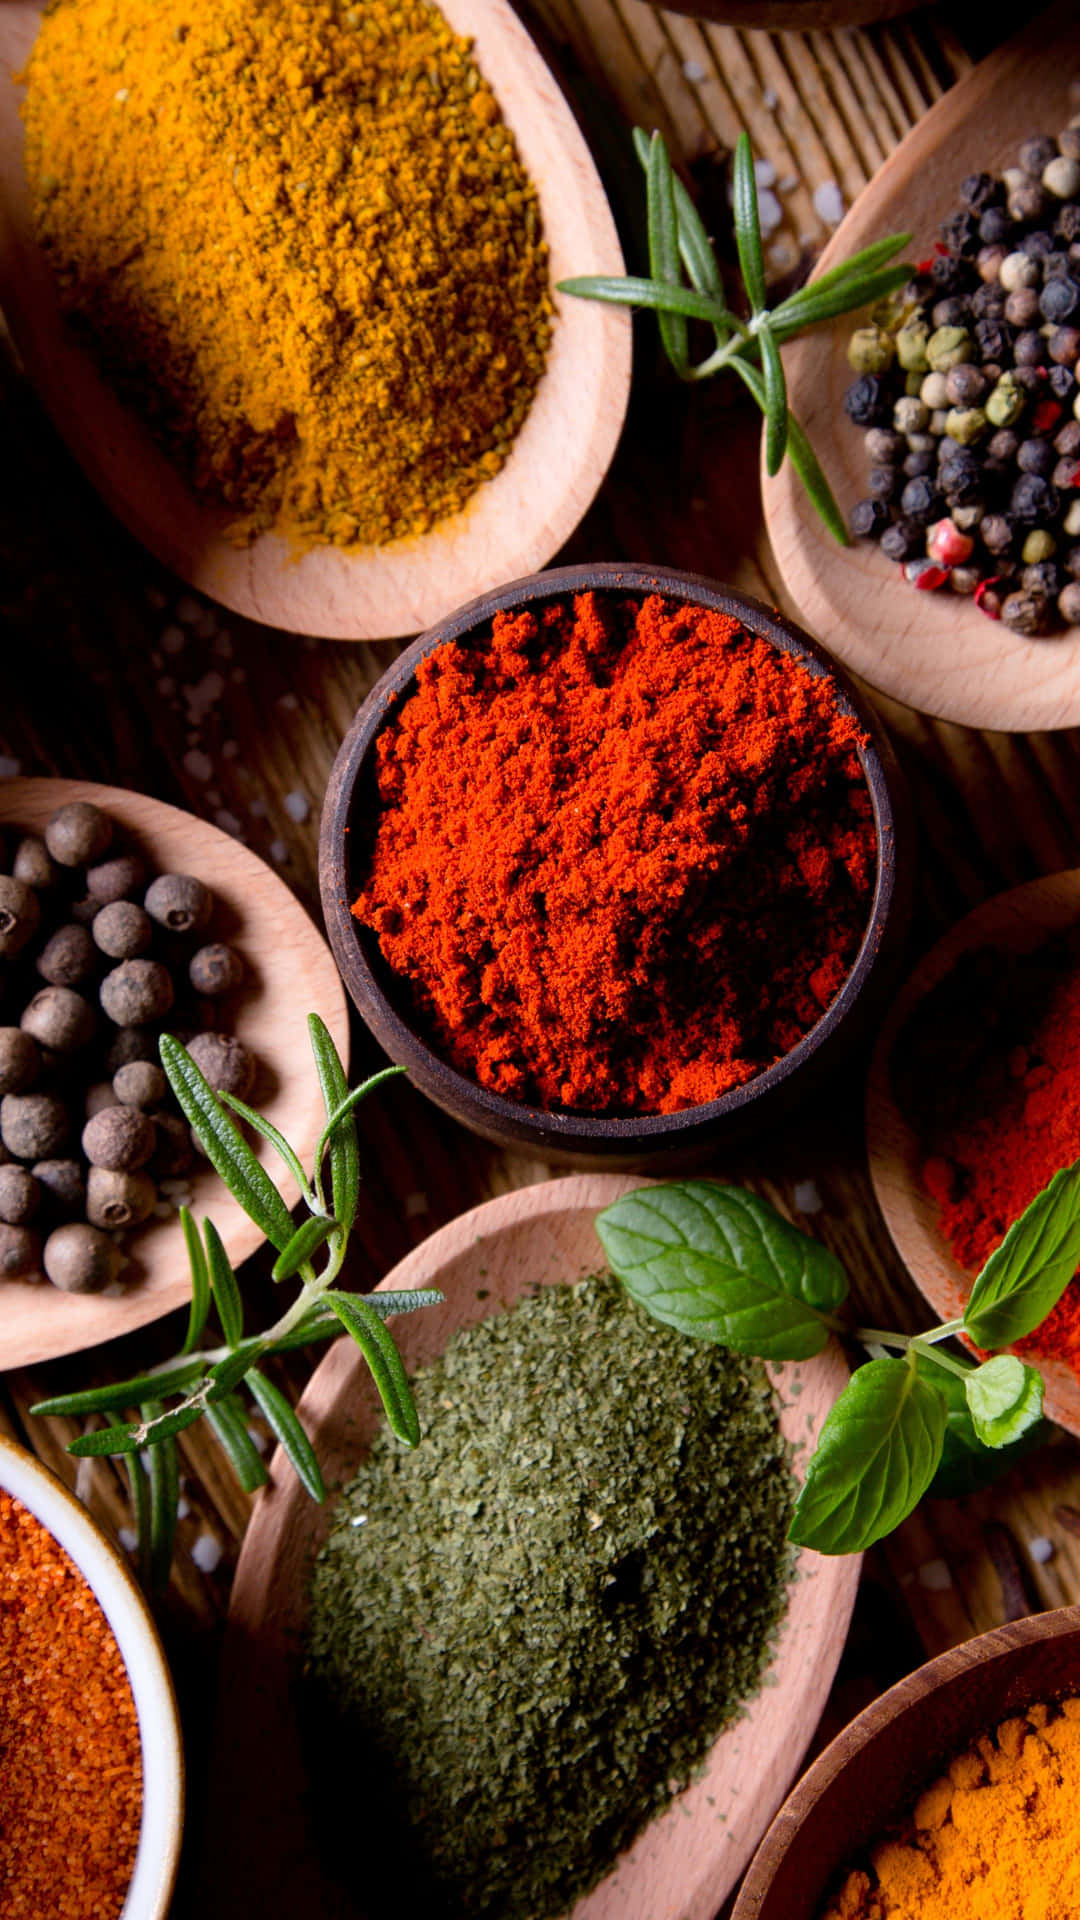 Online grocery shopping made simple with Spice